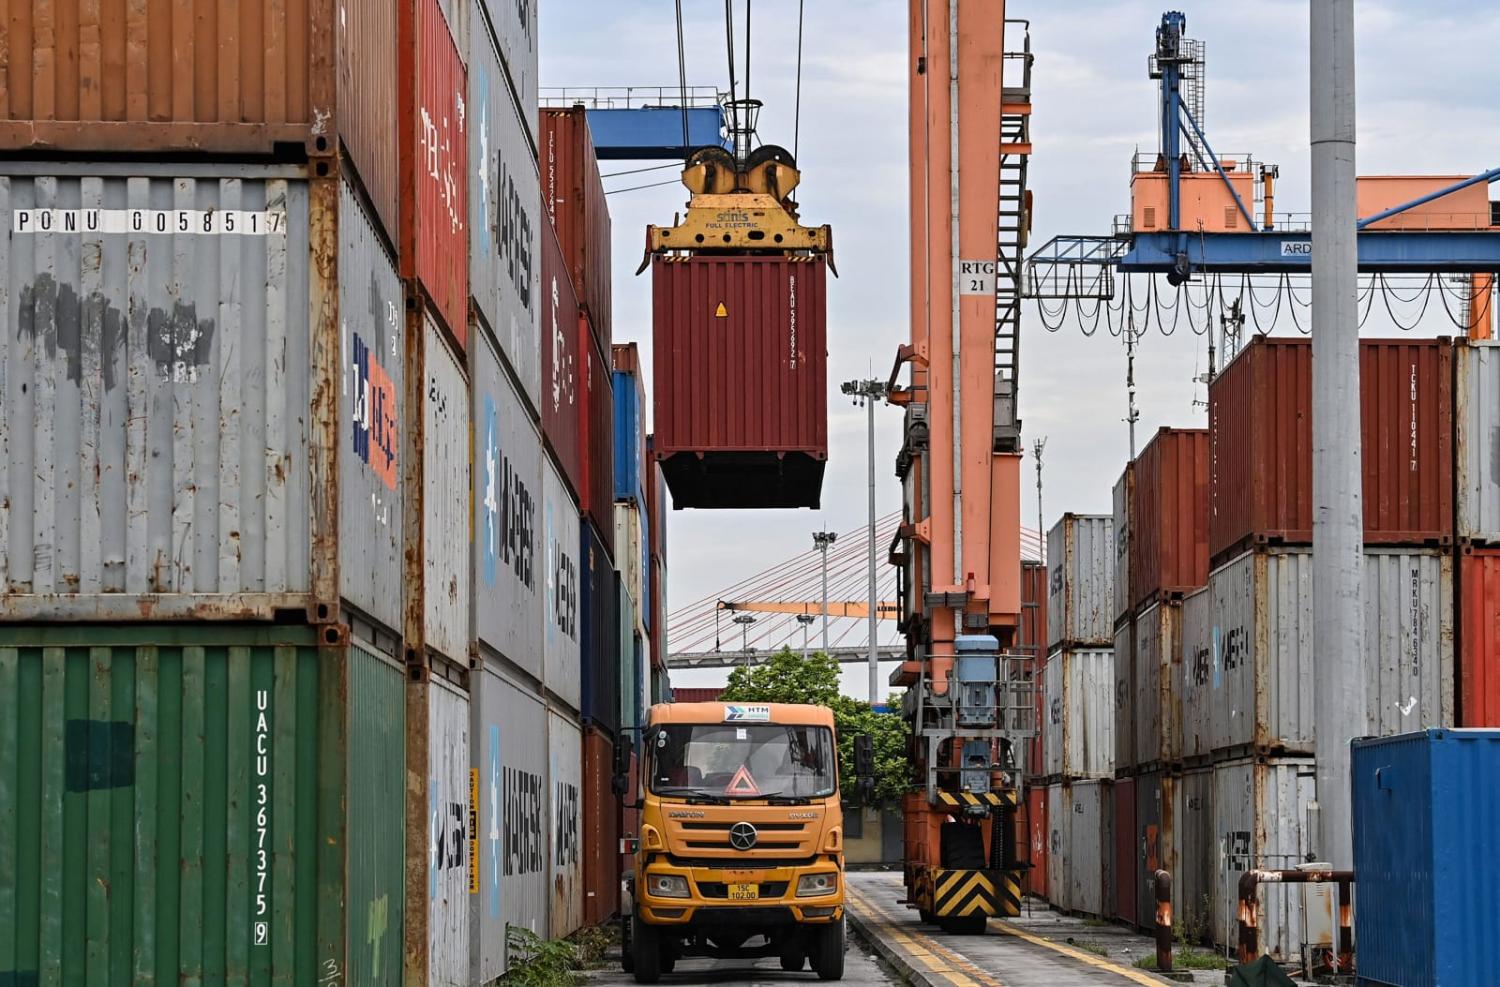 A forklift lifts a container at Tan Vu port in Hai Phong near Hanoi (Photo by Nhac Nguyen/AFP via Getty Images)